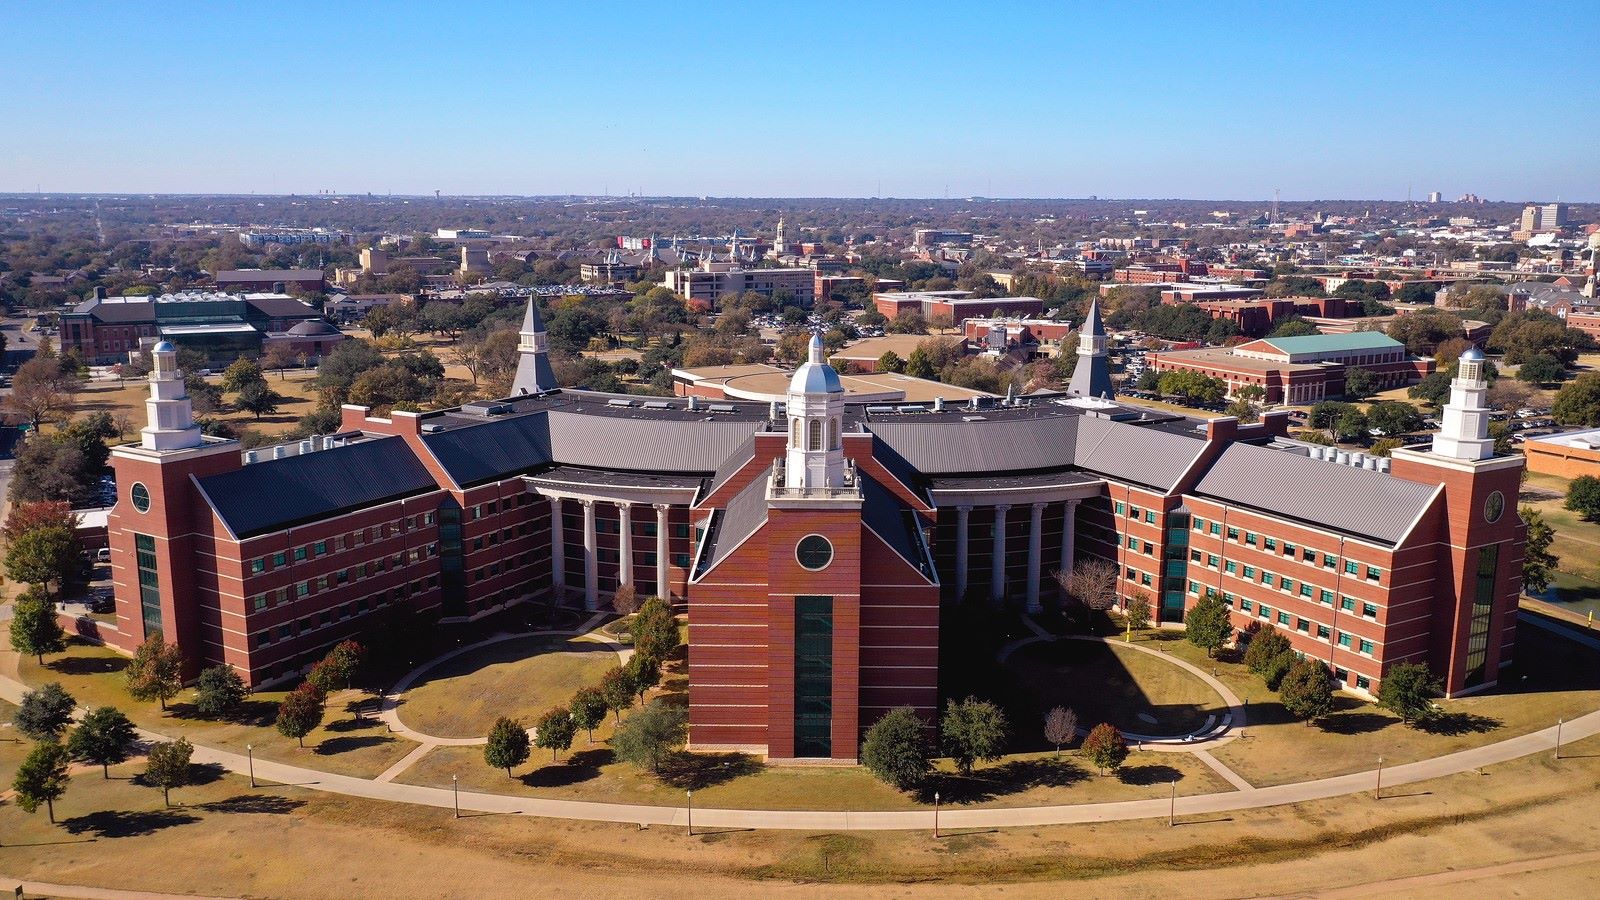 Photo of the Baylor Sciences Building